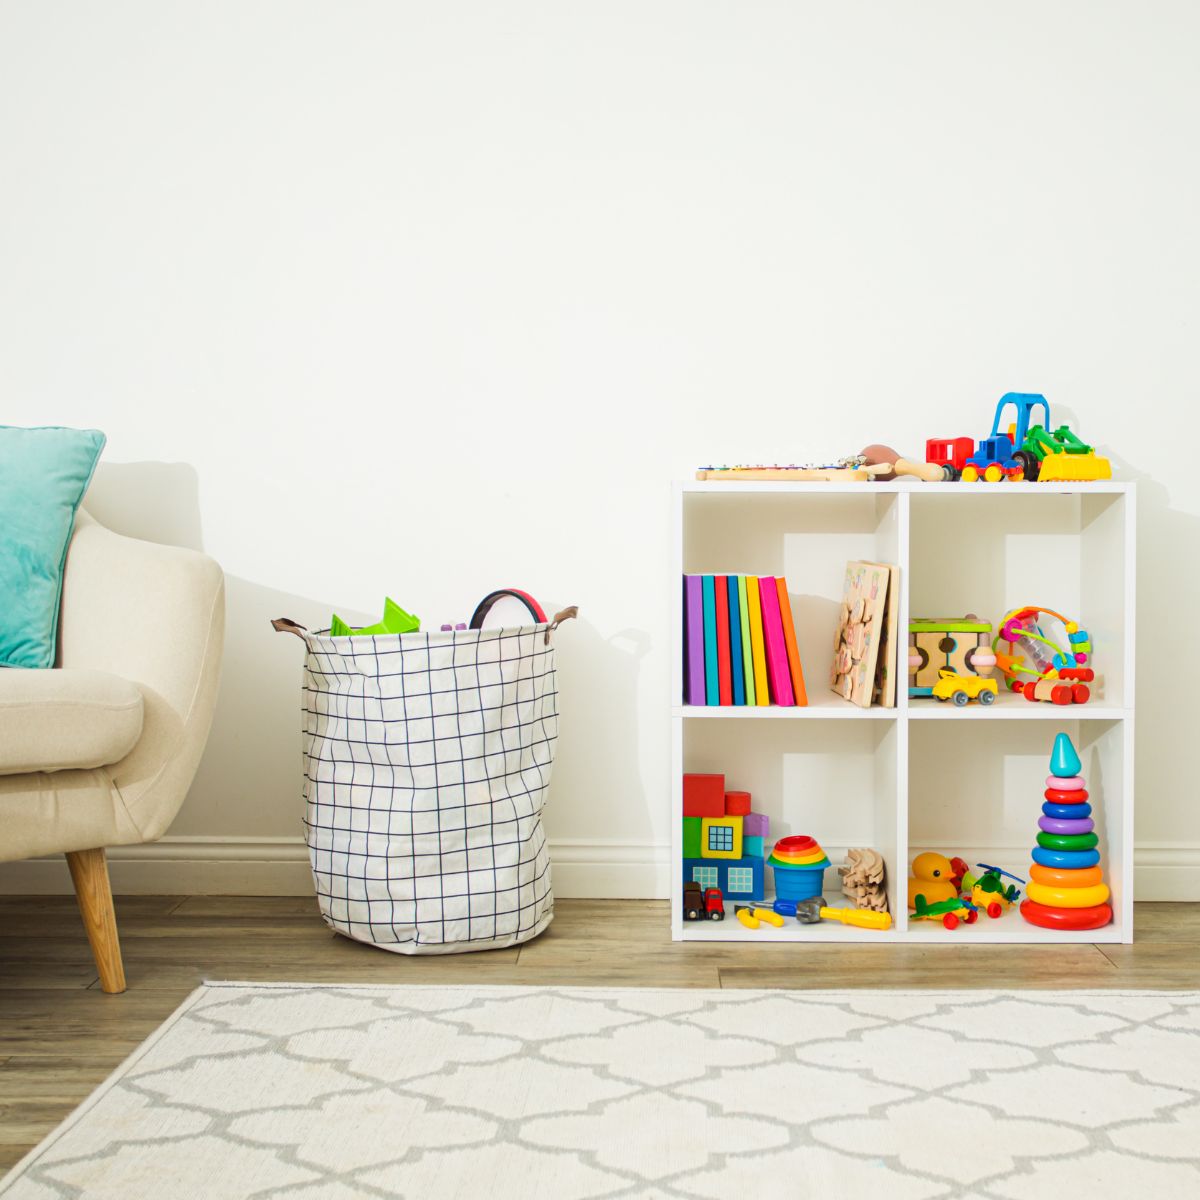 Square photo of a kid's room with a rug in the front of the picture. Behind the rug is part of a white chair with a blue pillow, a laundry bin with toys showing from the top, and a bookshelf being used as yor storage